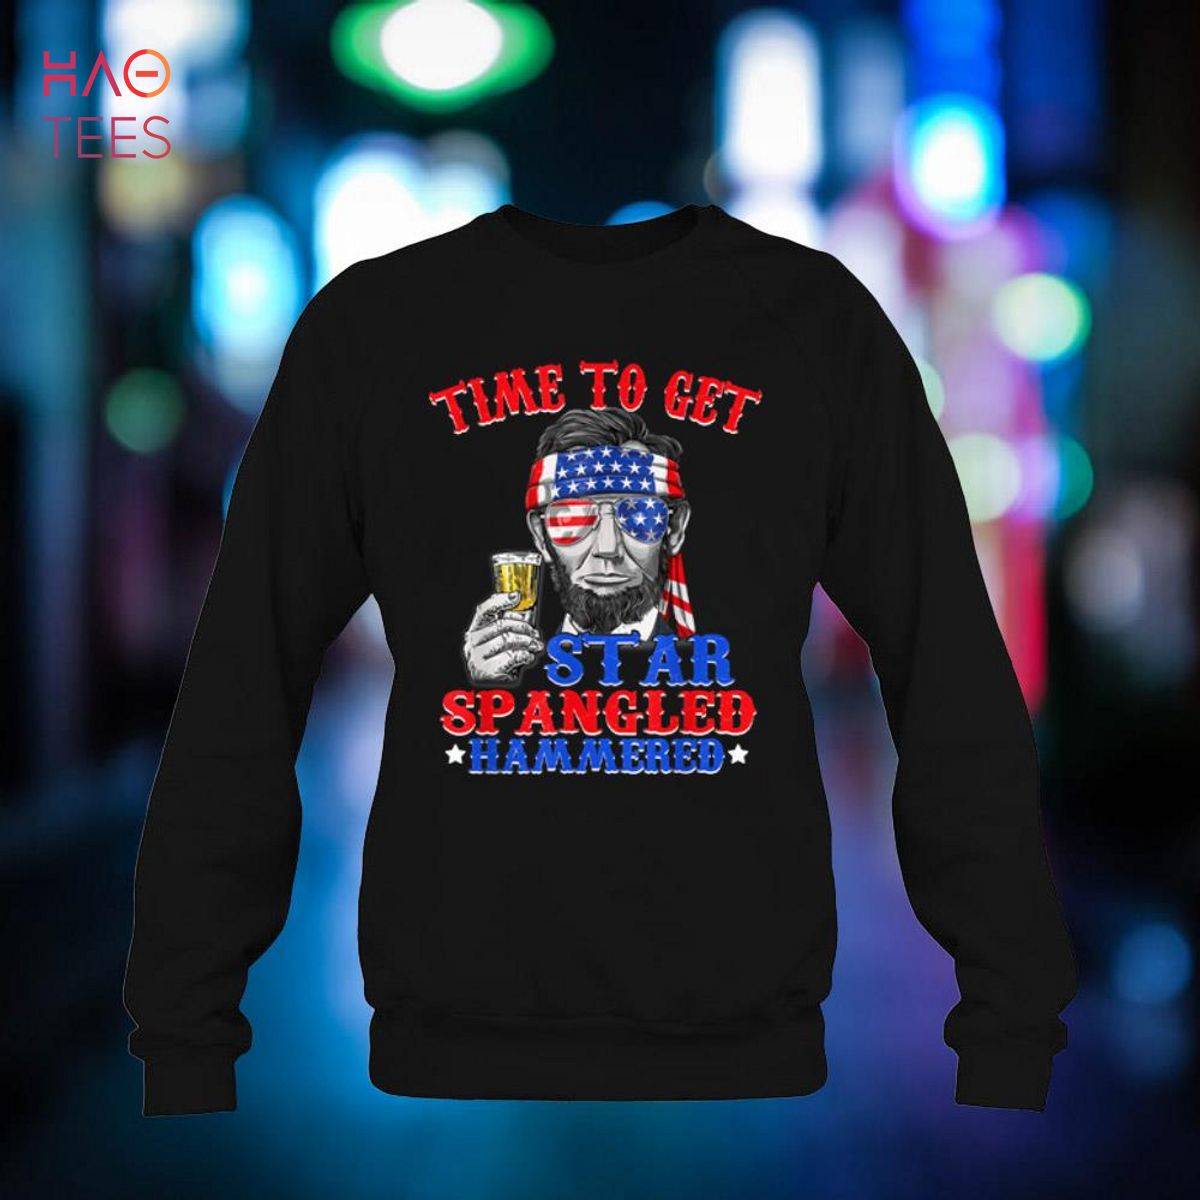 Time To Get Star Spangled Hammered T shirt 4th of July Men